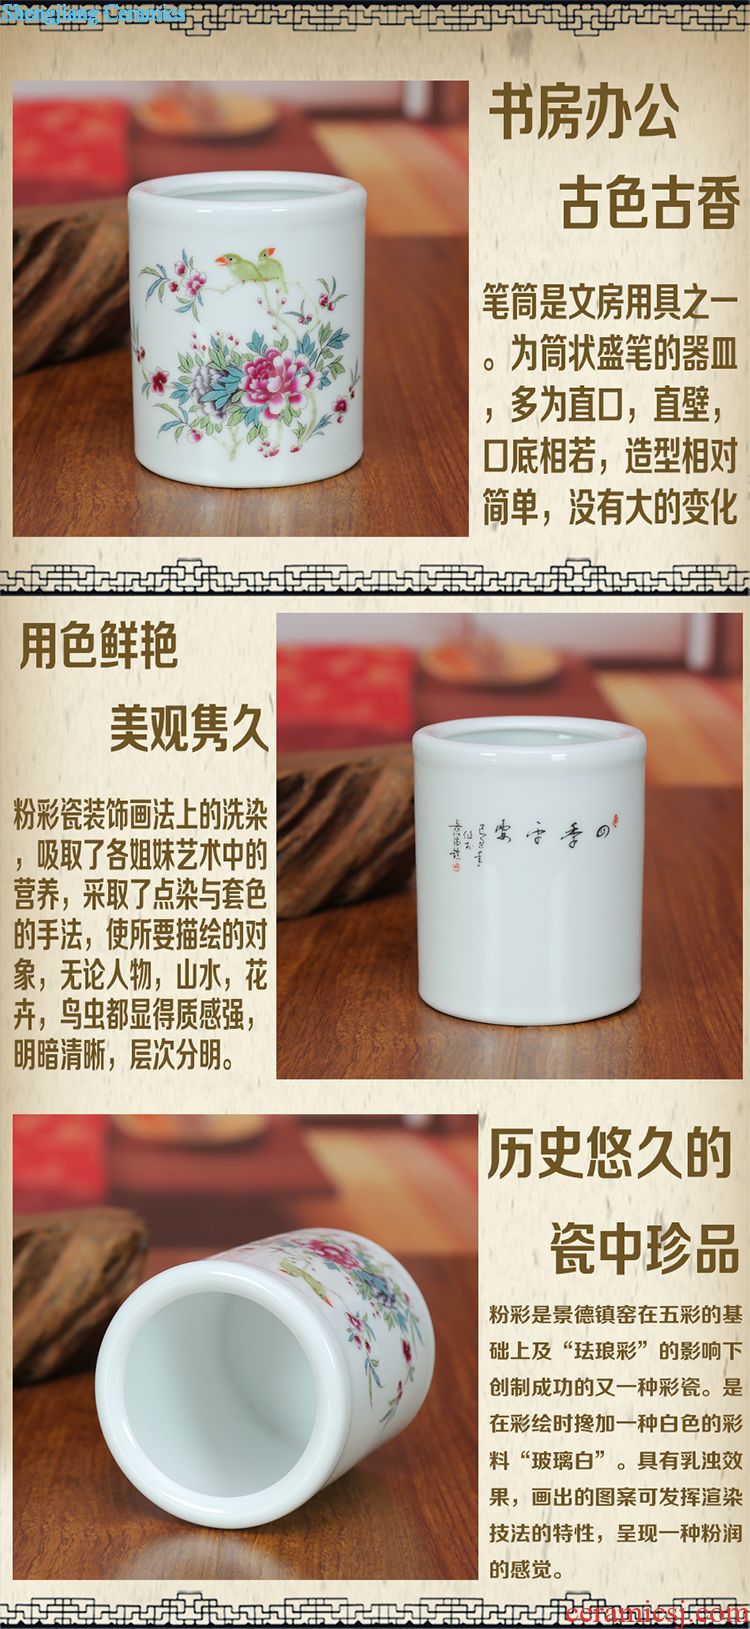 Jingdezhen ceramic vases, Chinese red modern home sitting room place gold peony pomegranate bottle housewarming gift